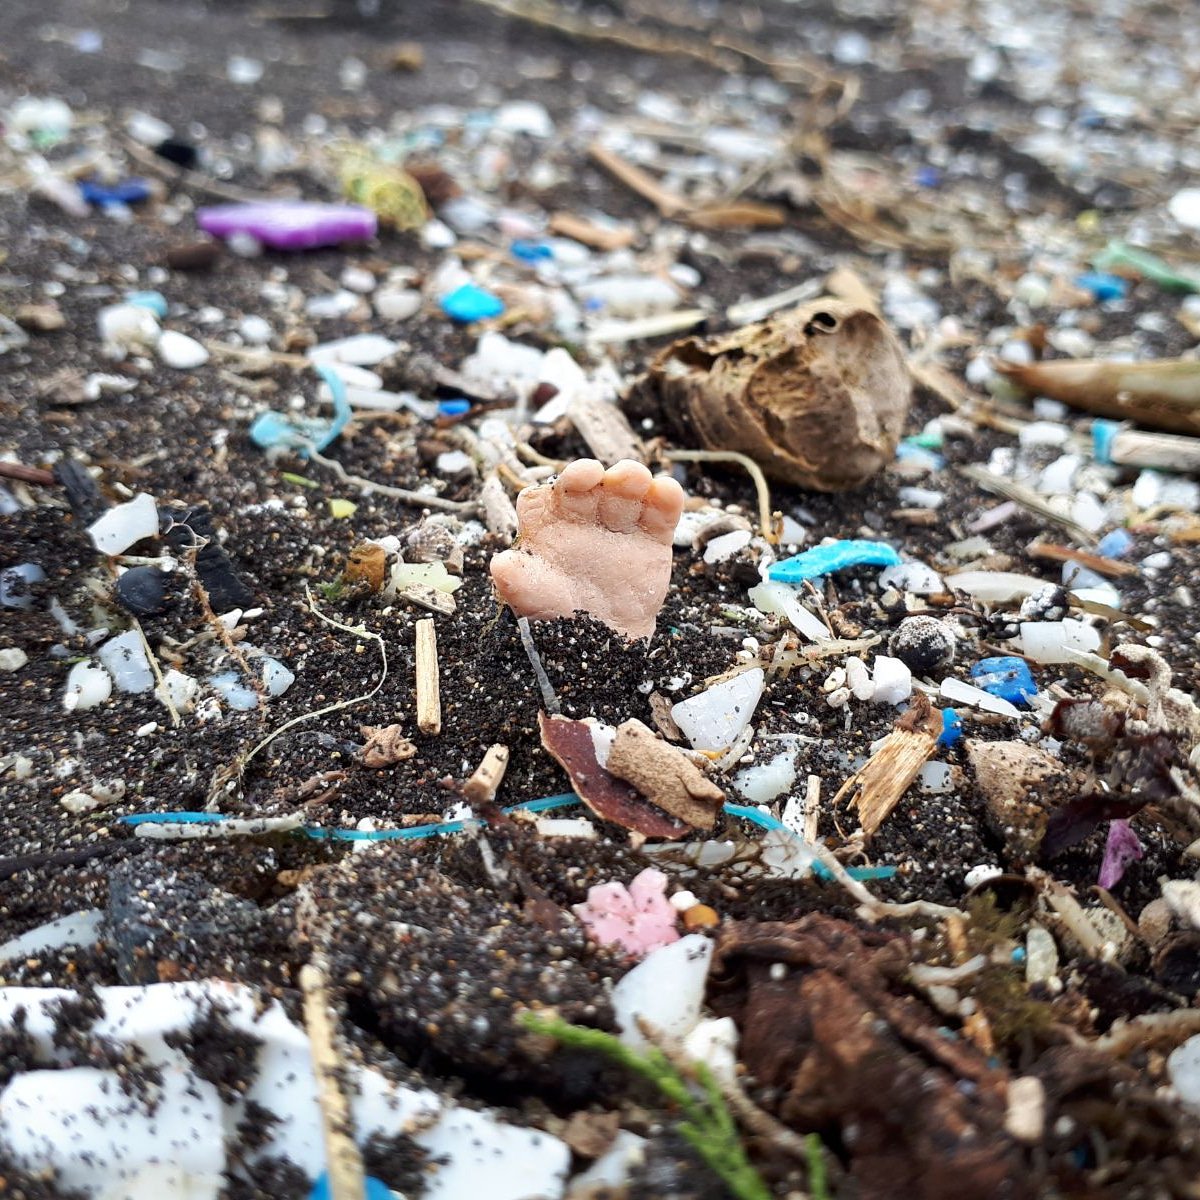 Hmm maybe the planet is trying to tell us something. Beach plastic at Horta, Azores. #MarinePlastics